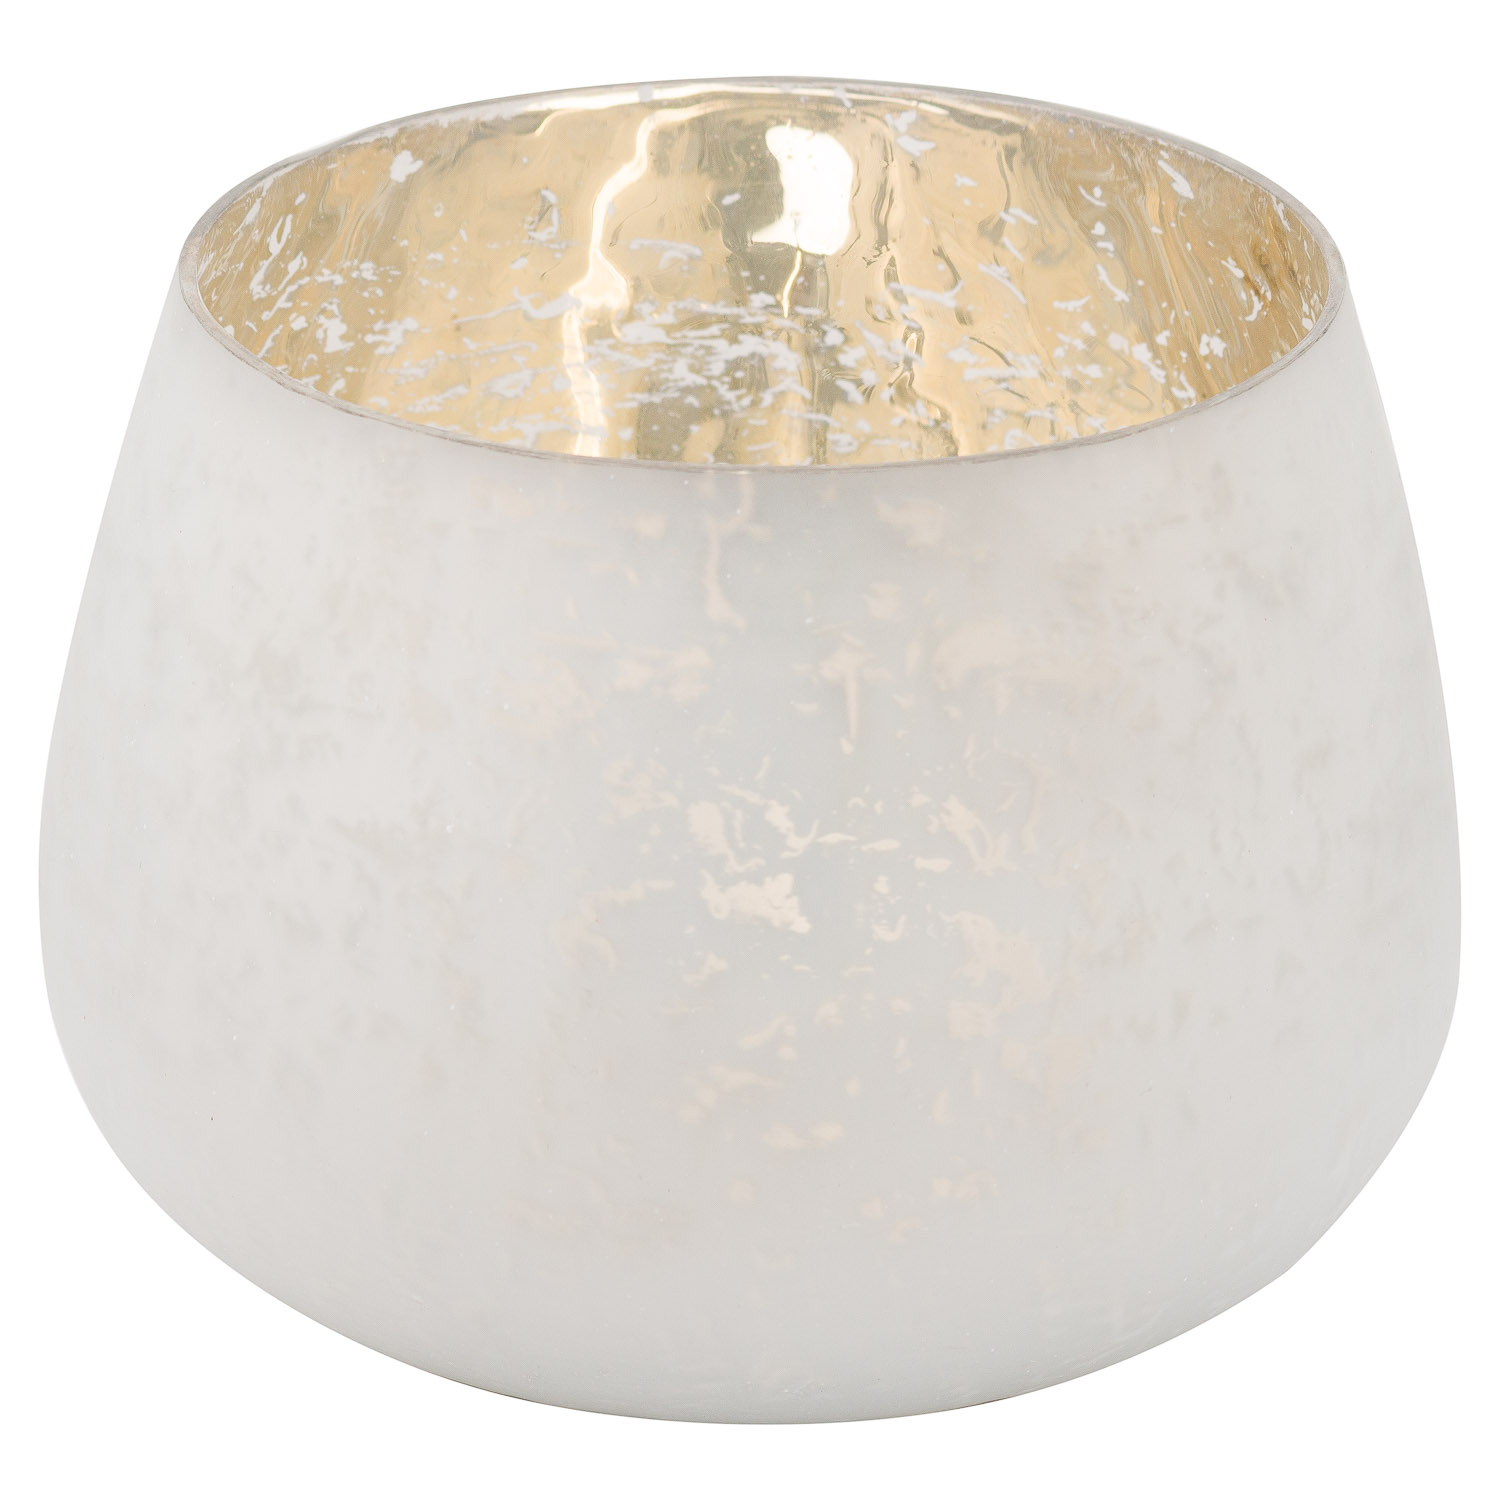 The Noel Collection Large White Patterned Candle Holder - Image 1